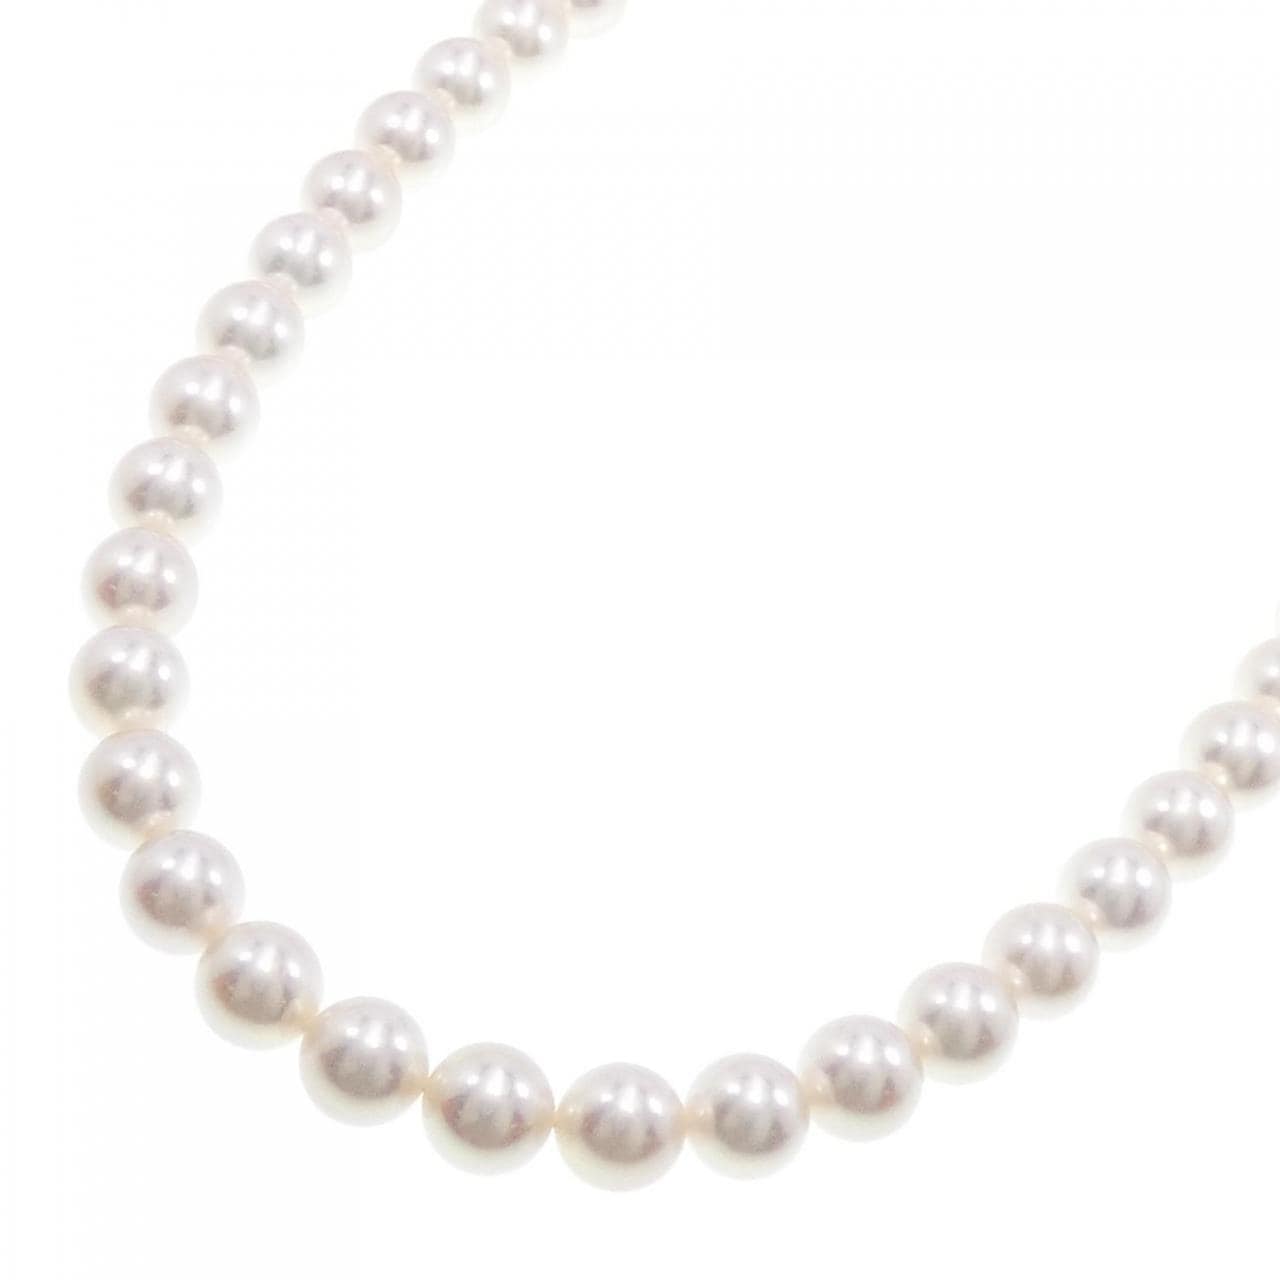 Silver clasp/K14WG Akoya pearl necklace 8.5-9mm necklace and earrings set